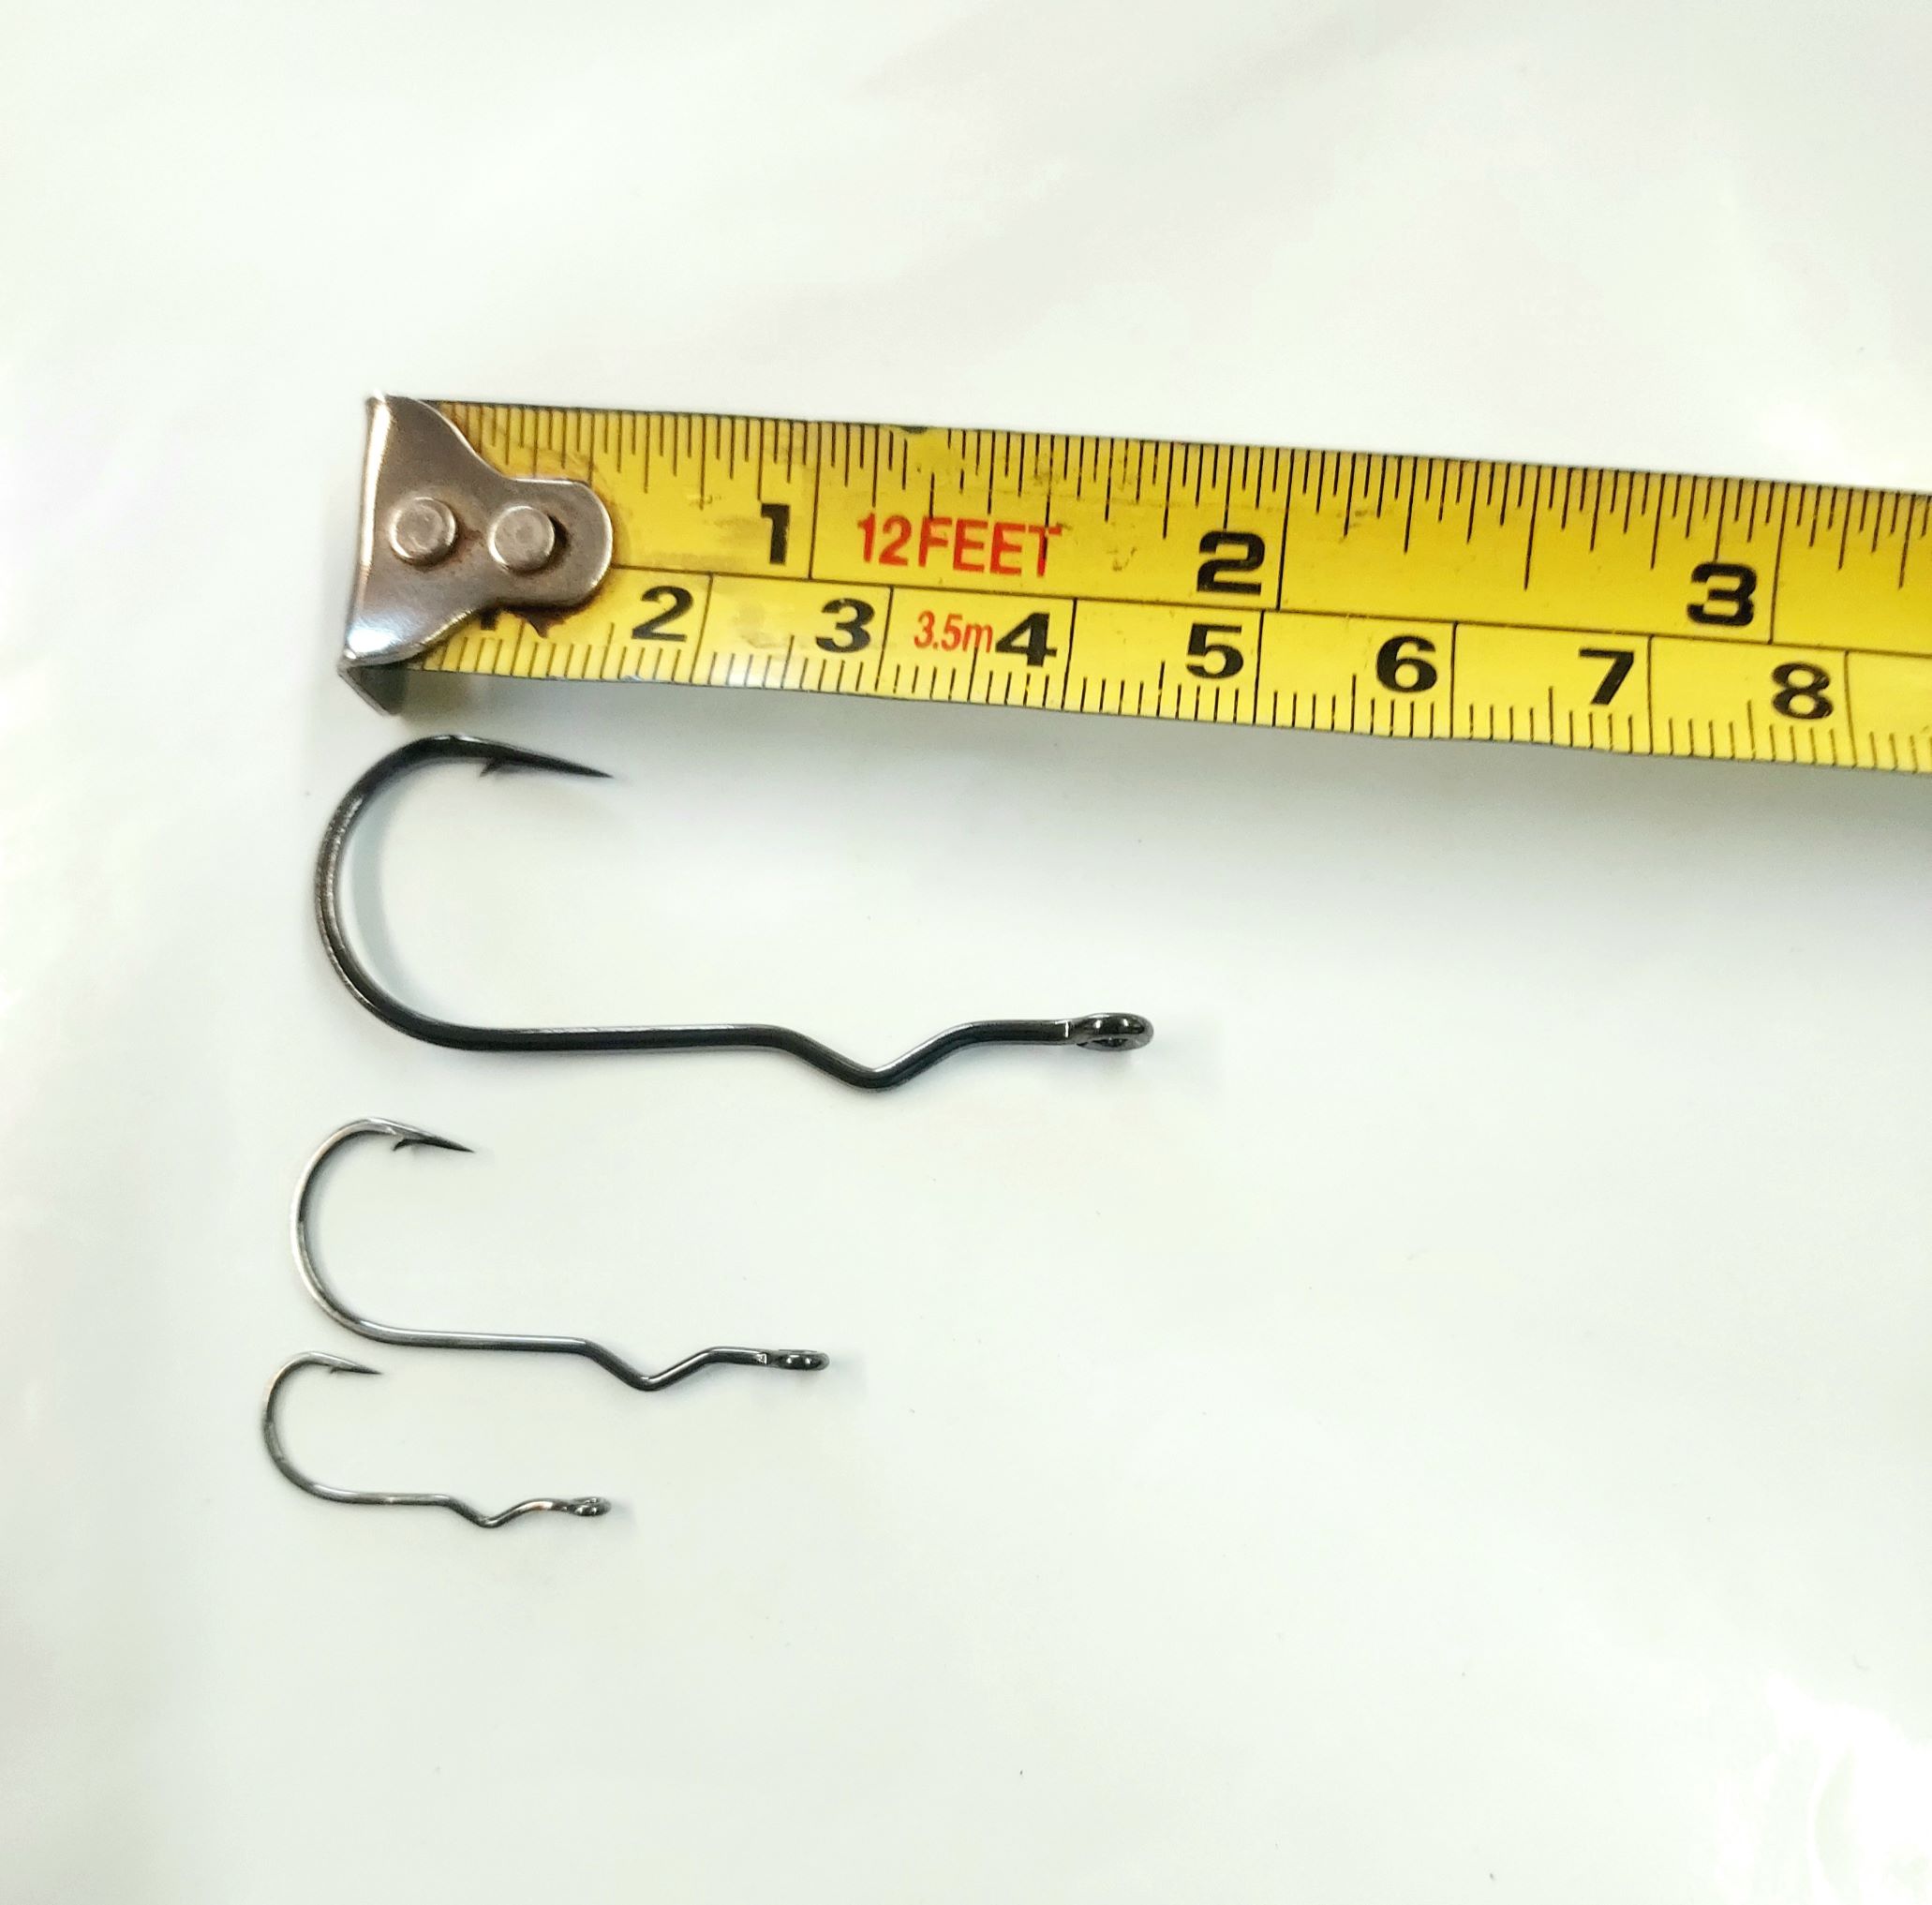 2, 4 or 6 size fishing hooks are the best hooks for crappie fishing